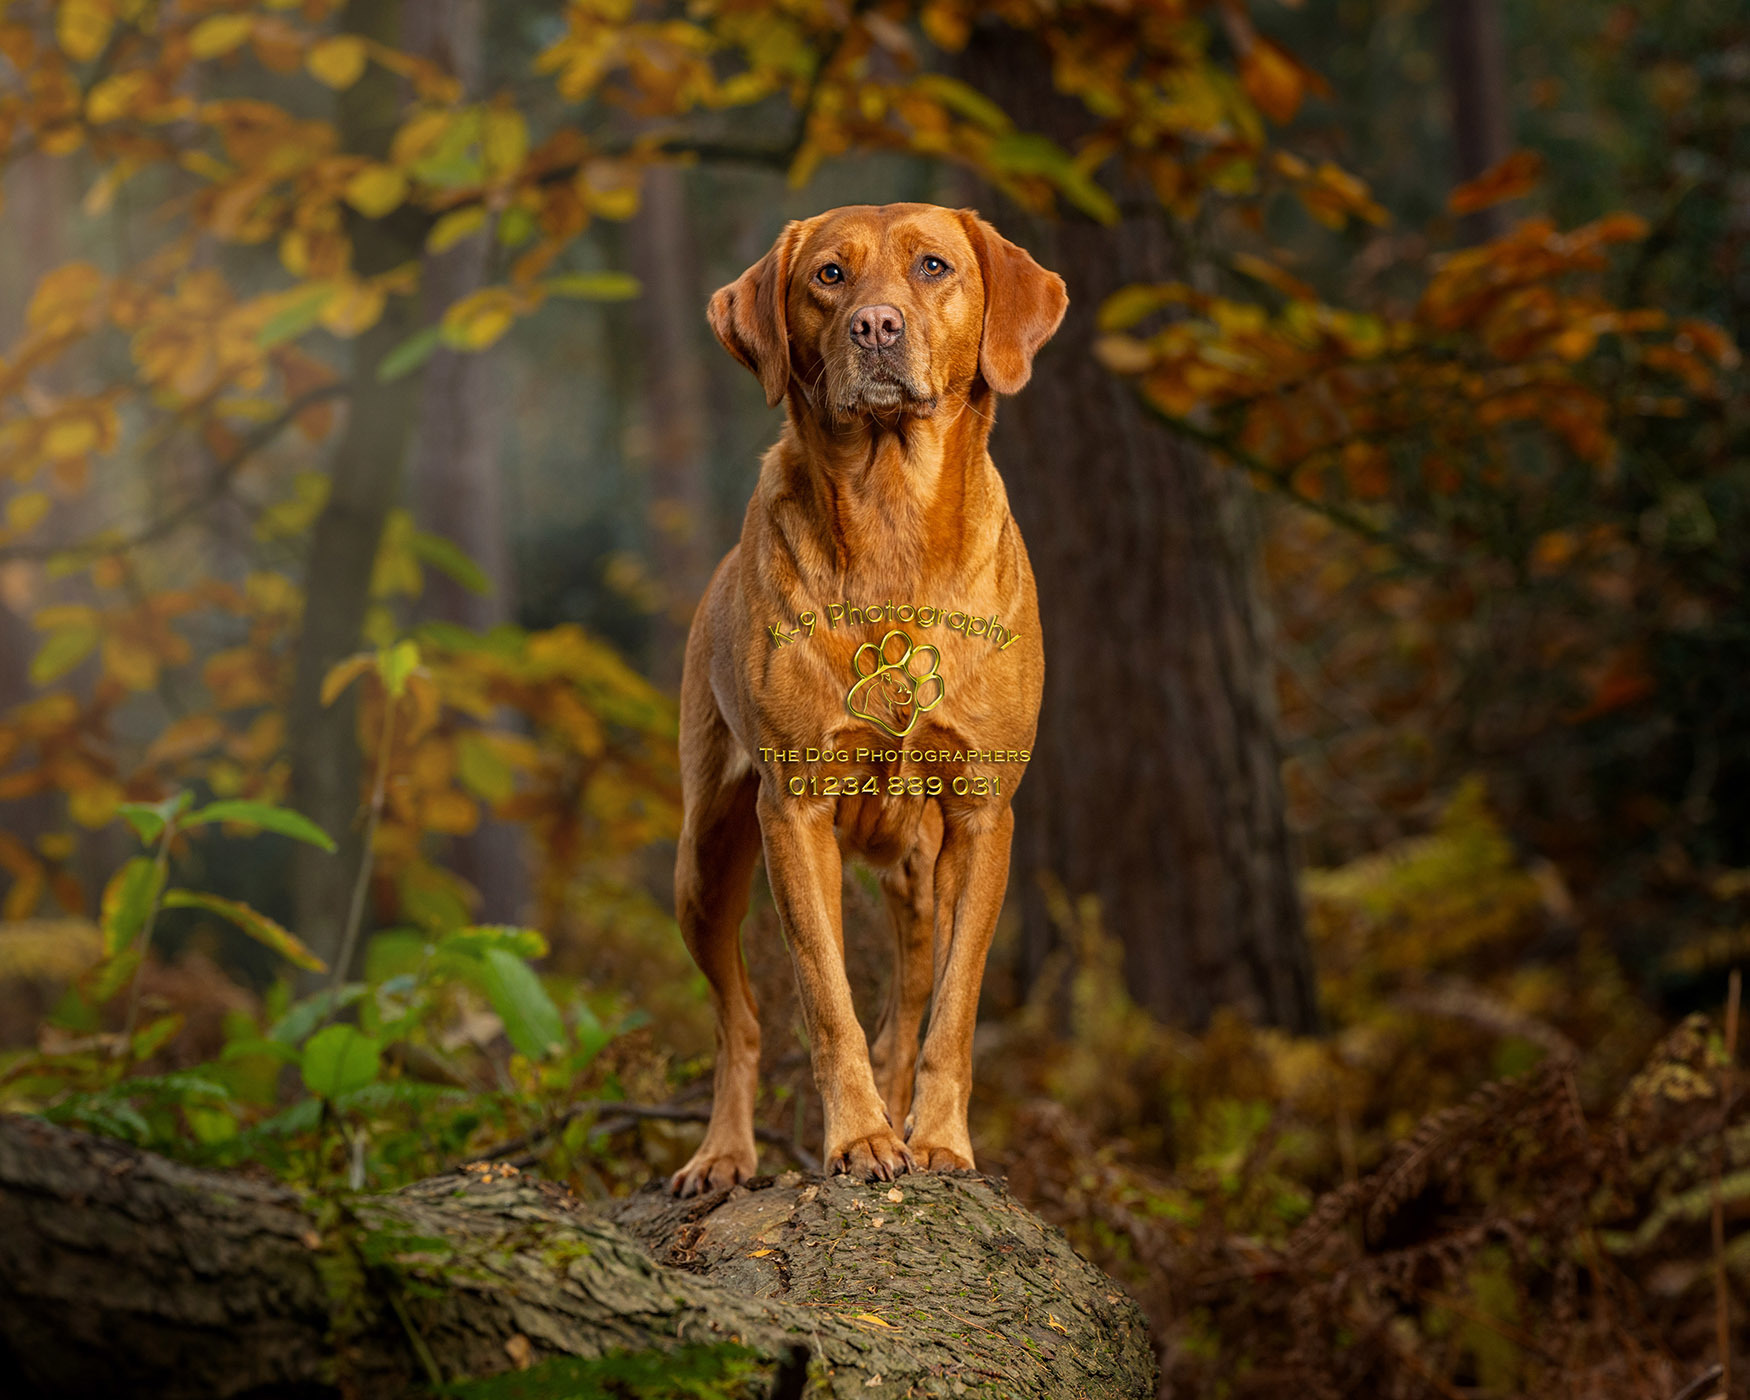 Dog and Pet Photography specialist in Bedford, Bedfordshire |photographed on location by award winning Dog and Pet photographer Adrian Bullers